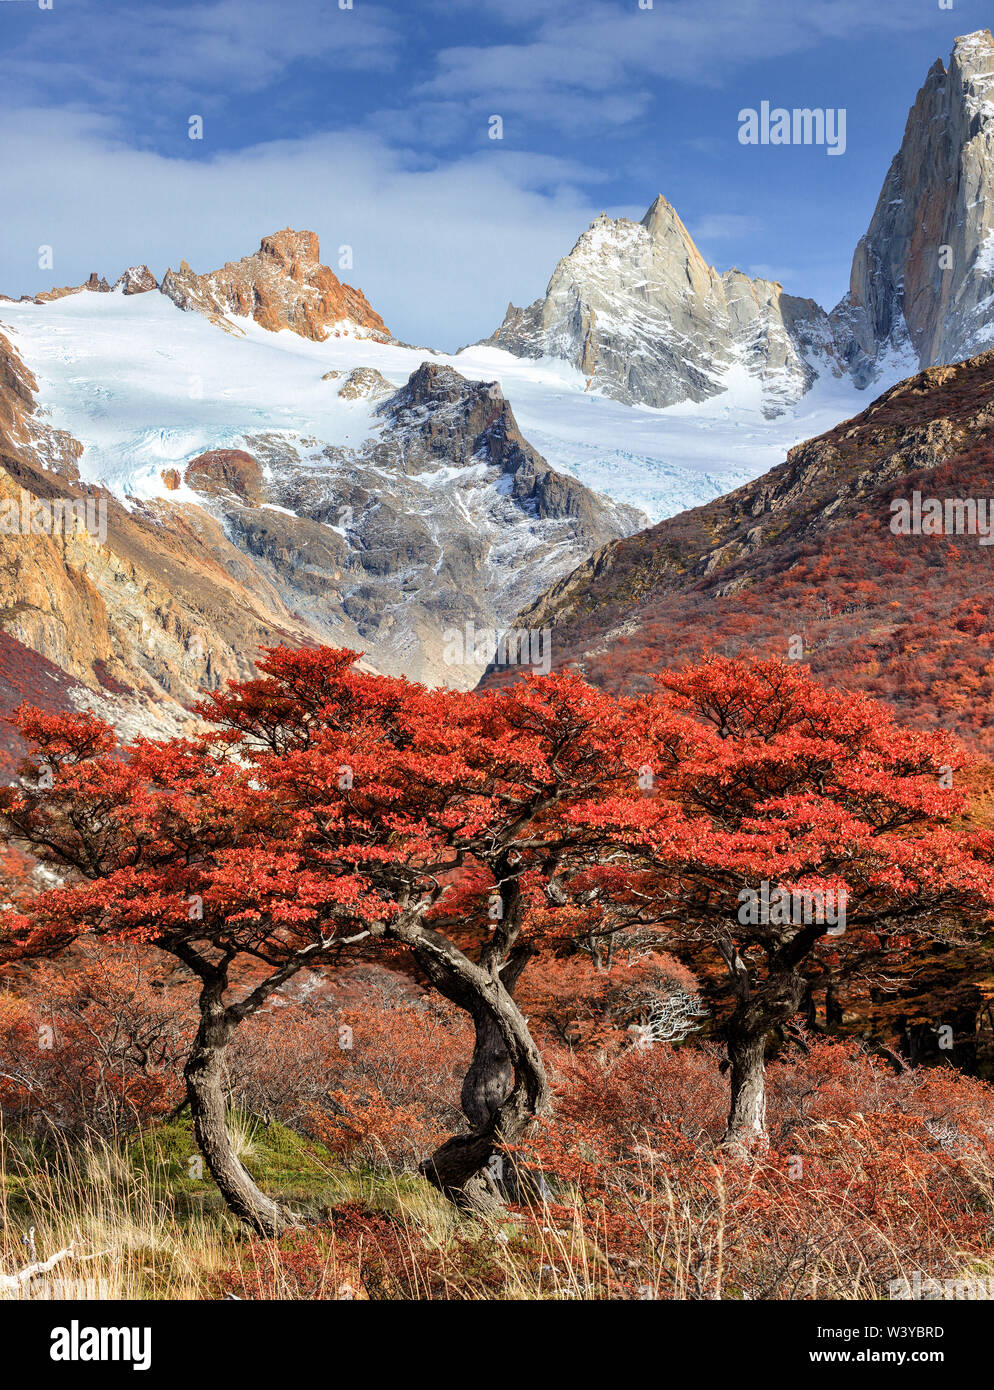 Fitz Roy mountain and beech trees near El Chalten, in the Southern Patagonia, on the border between Argentina and Chile. Los Glaciares National Park. Stock Photo